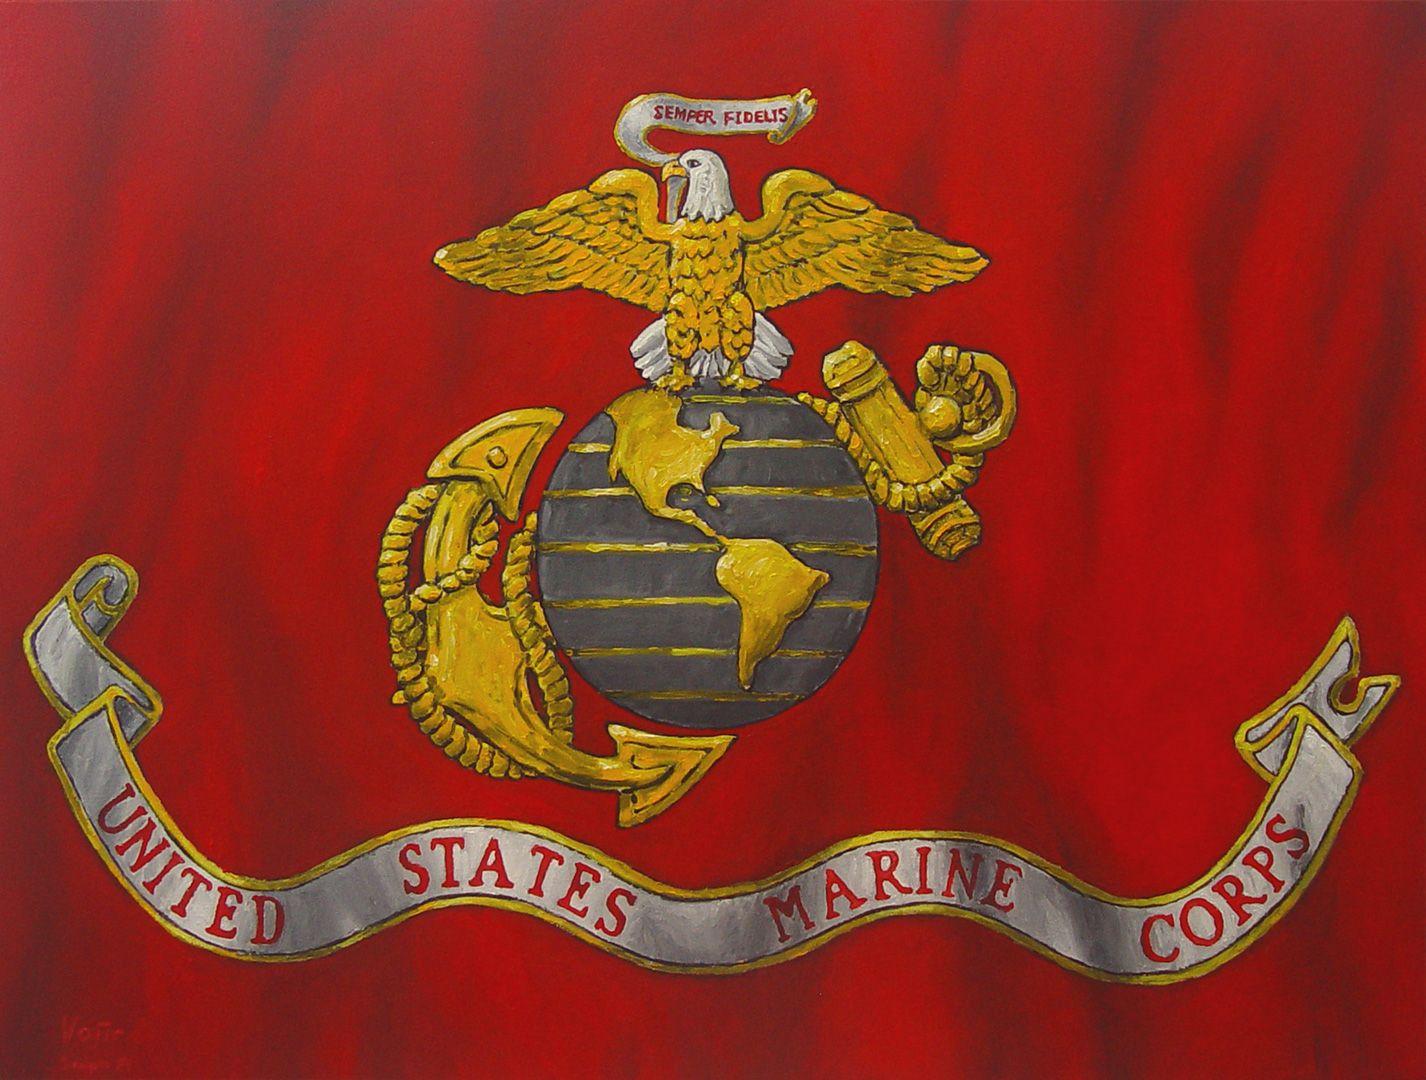 THE WARRIOR SONG – THE UNITED STATES MARINE CORPS